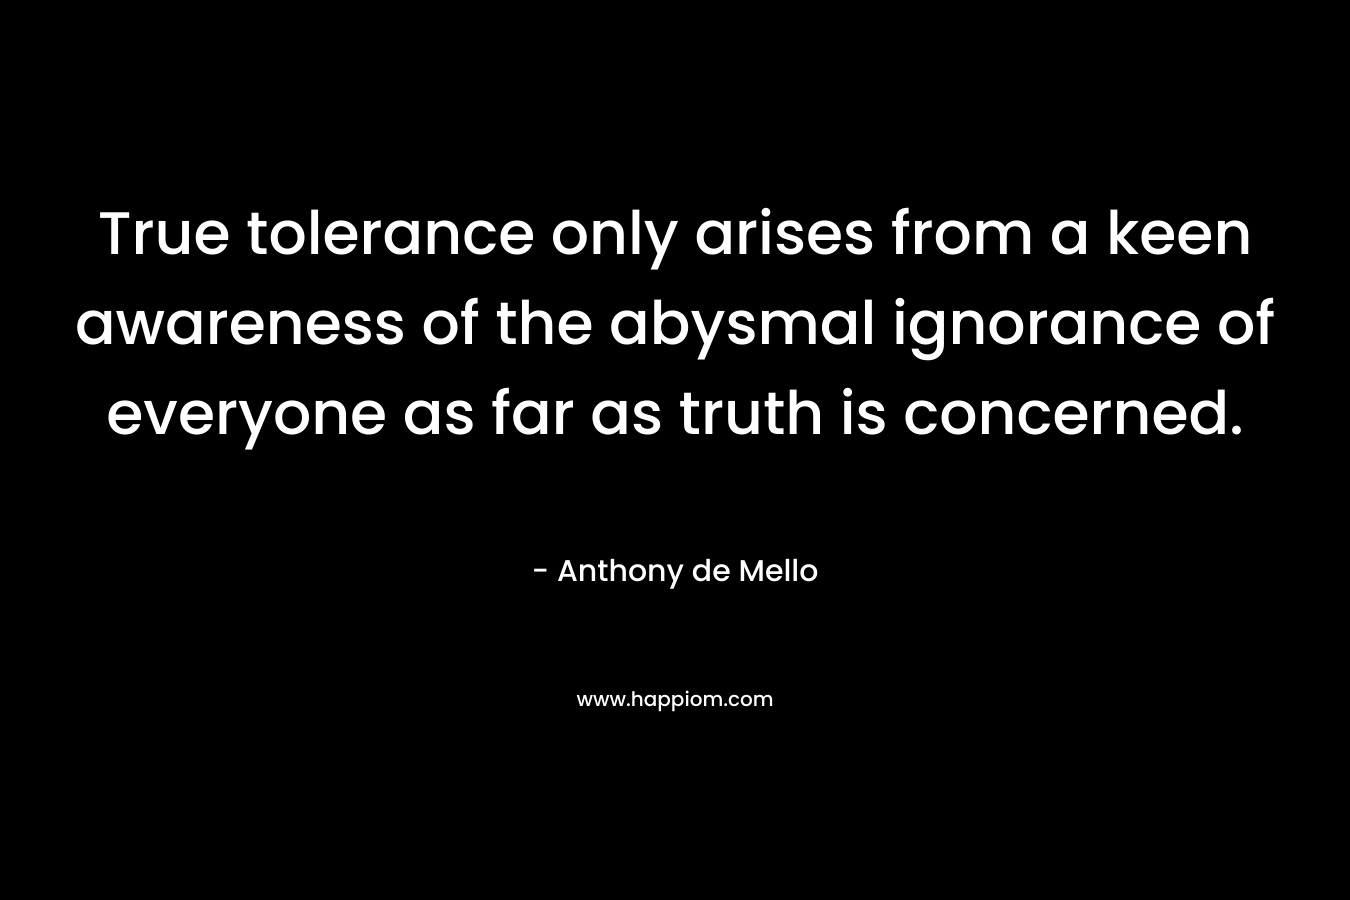 True tolerance only arises from a keen awareness of the abysmal ignorance of everyone as far as truth is concerned. – Anthony de Mello